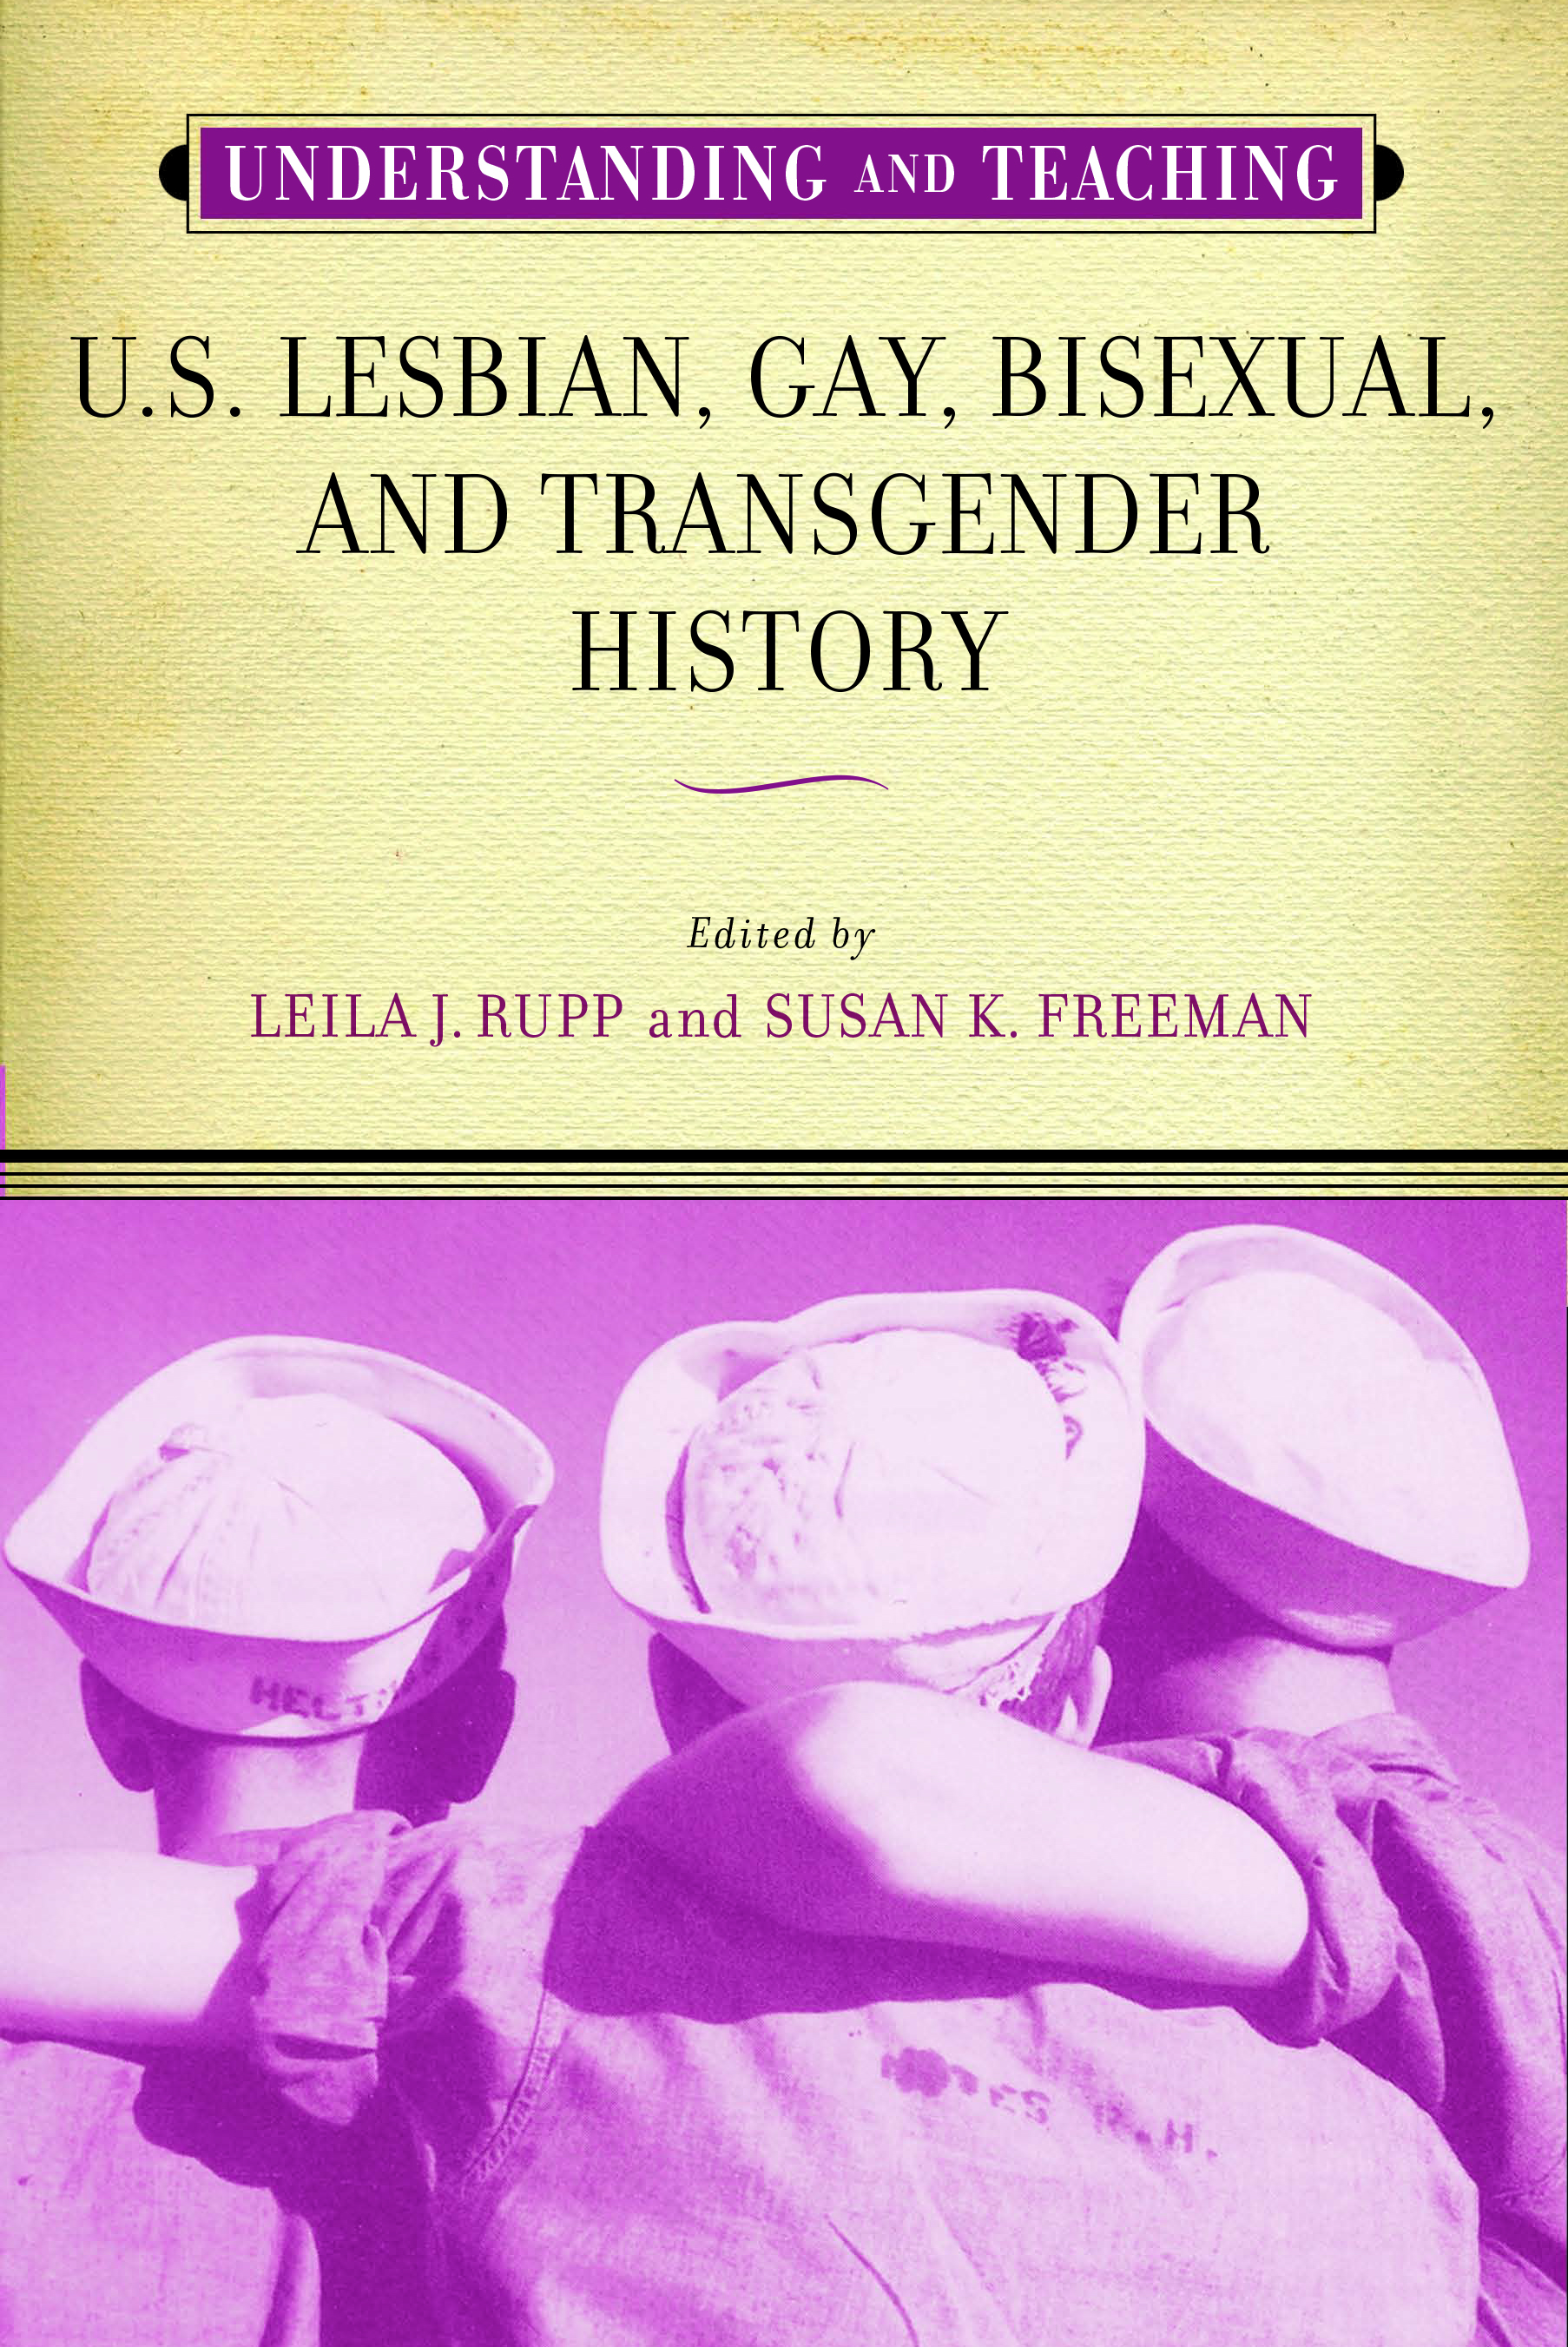 Gay lesbian and bisexual history